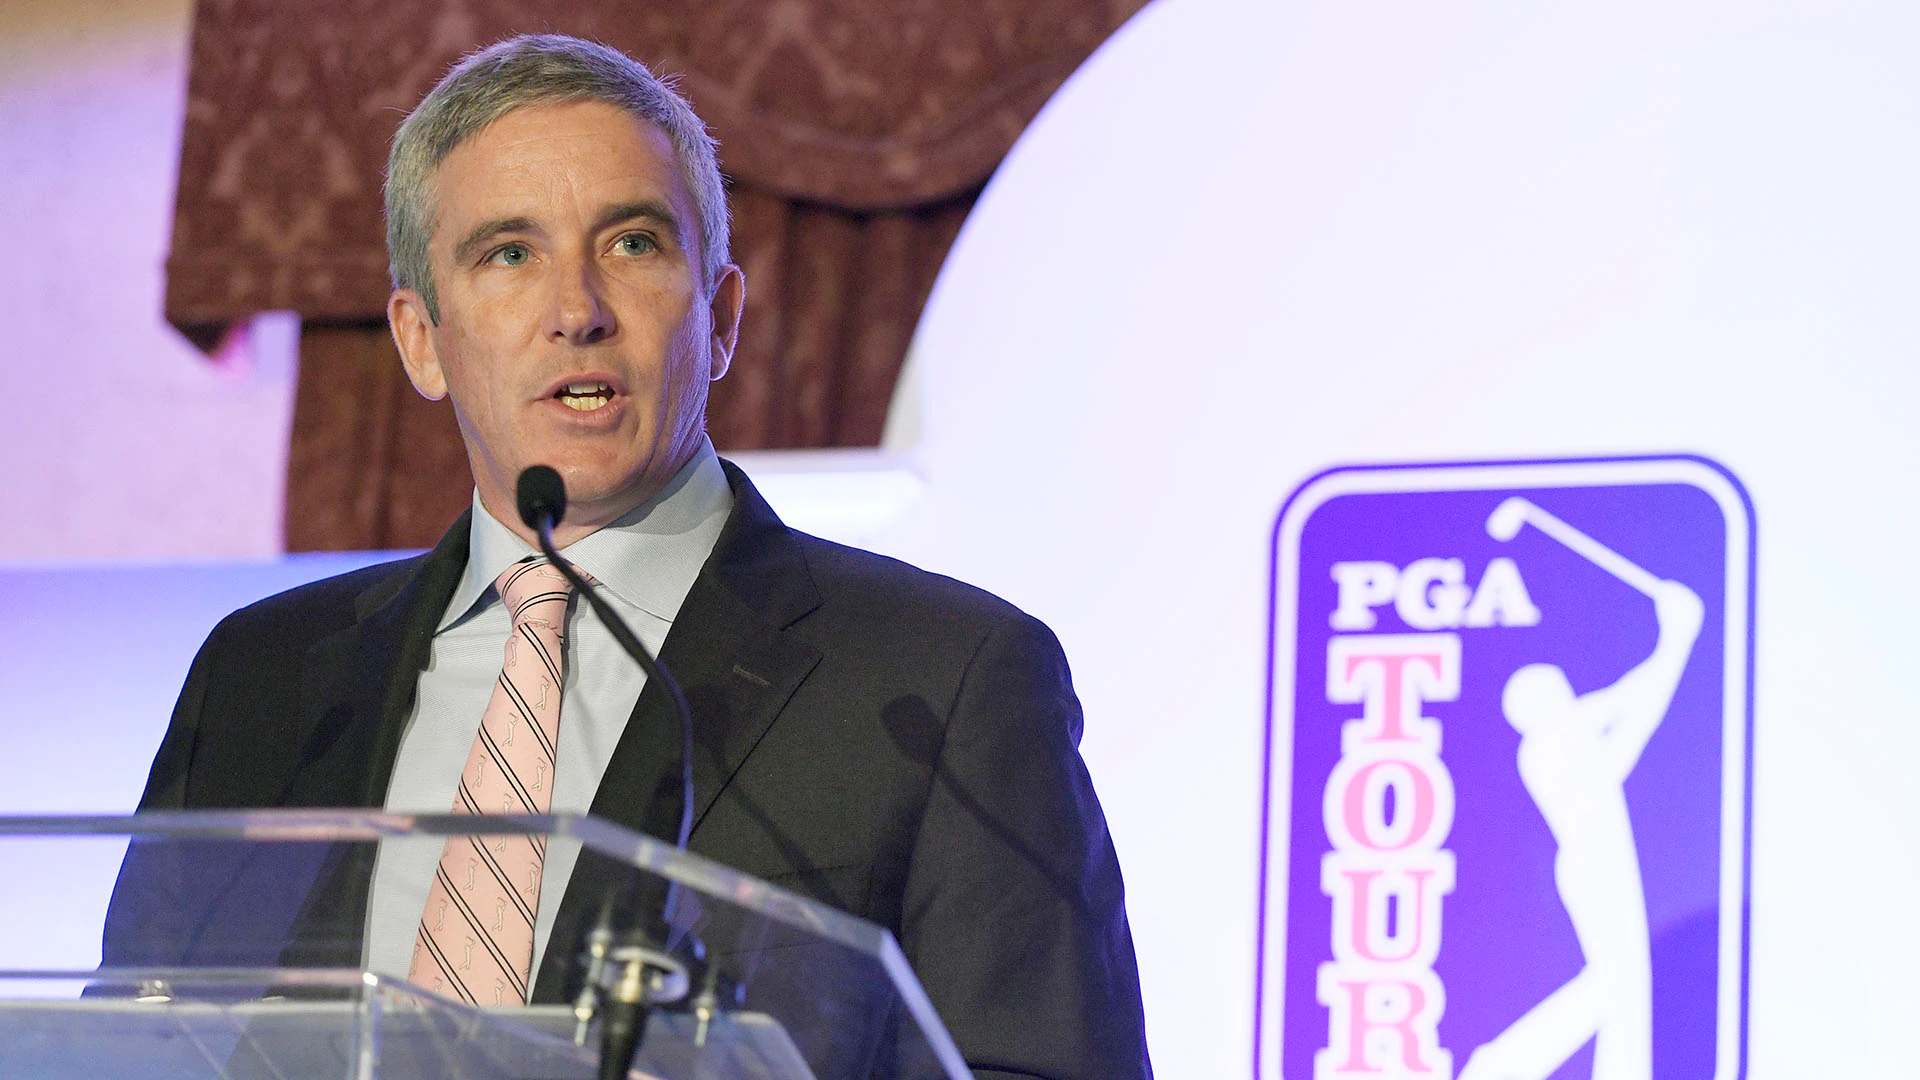 PGA Tour commissioner Jay Monahan reiterates punishment for any player joining rival tour, say sources